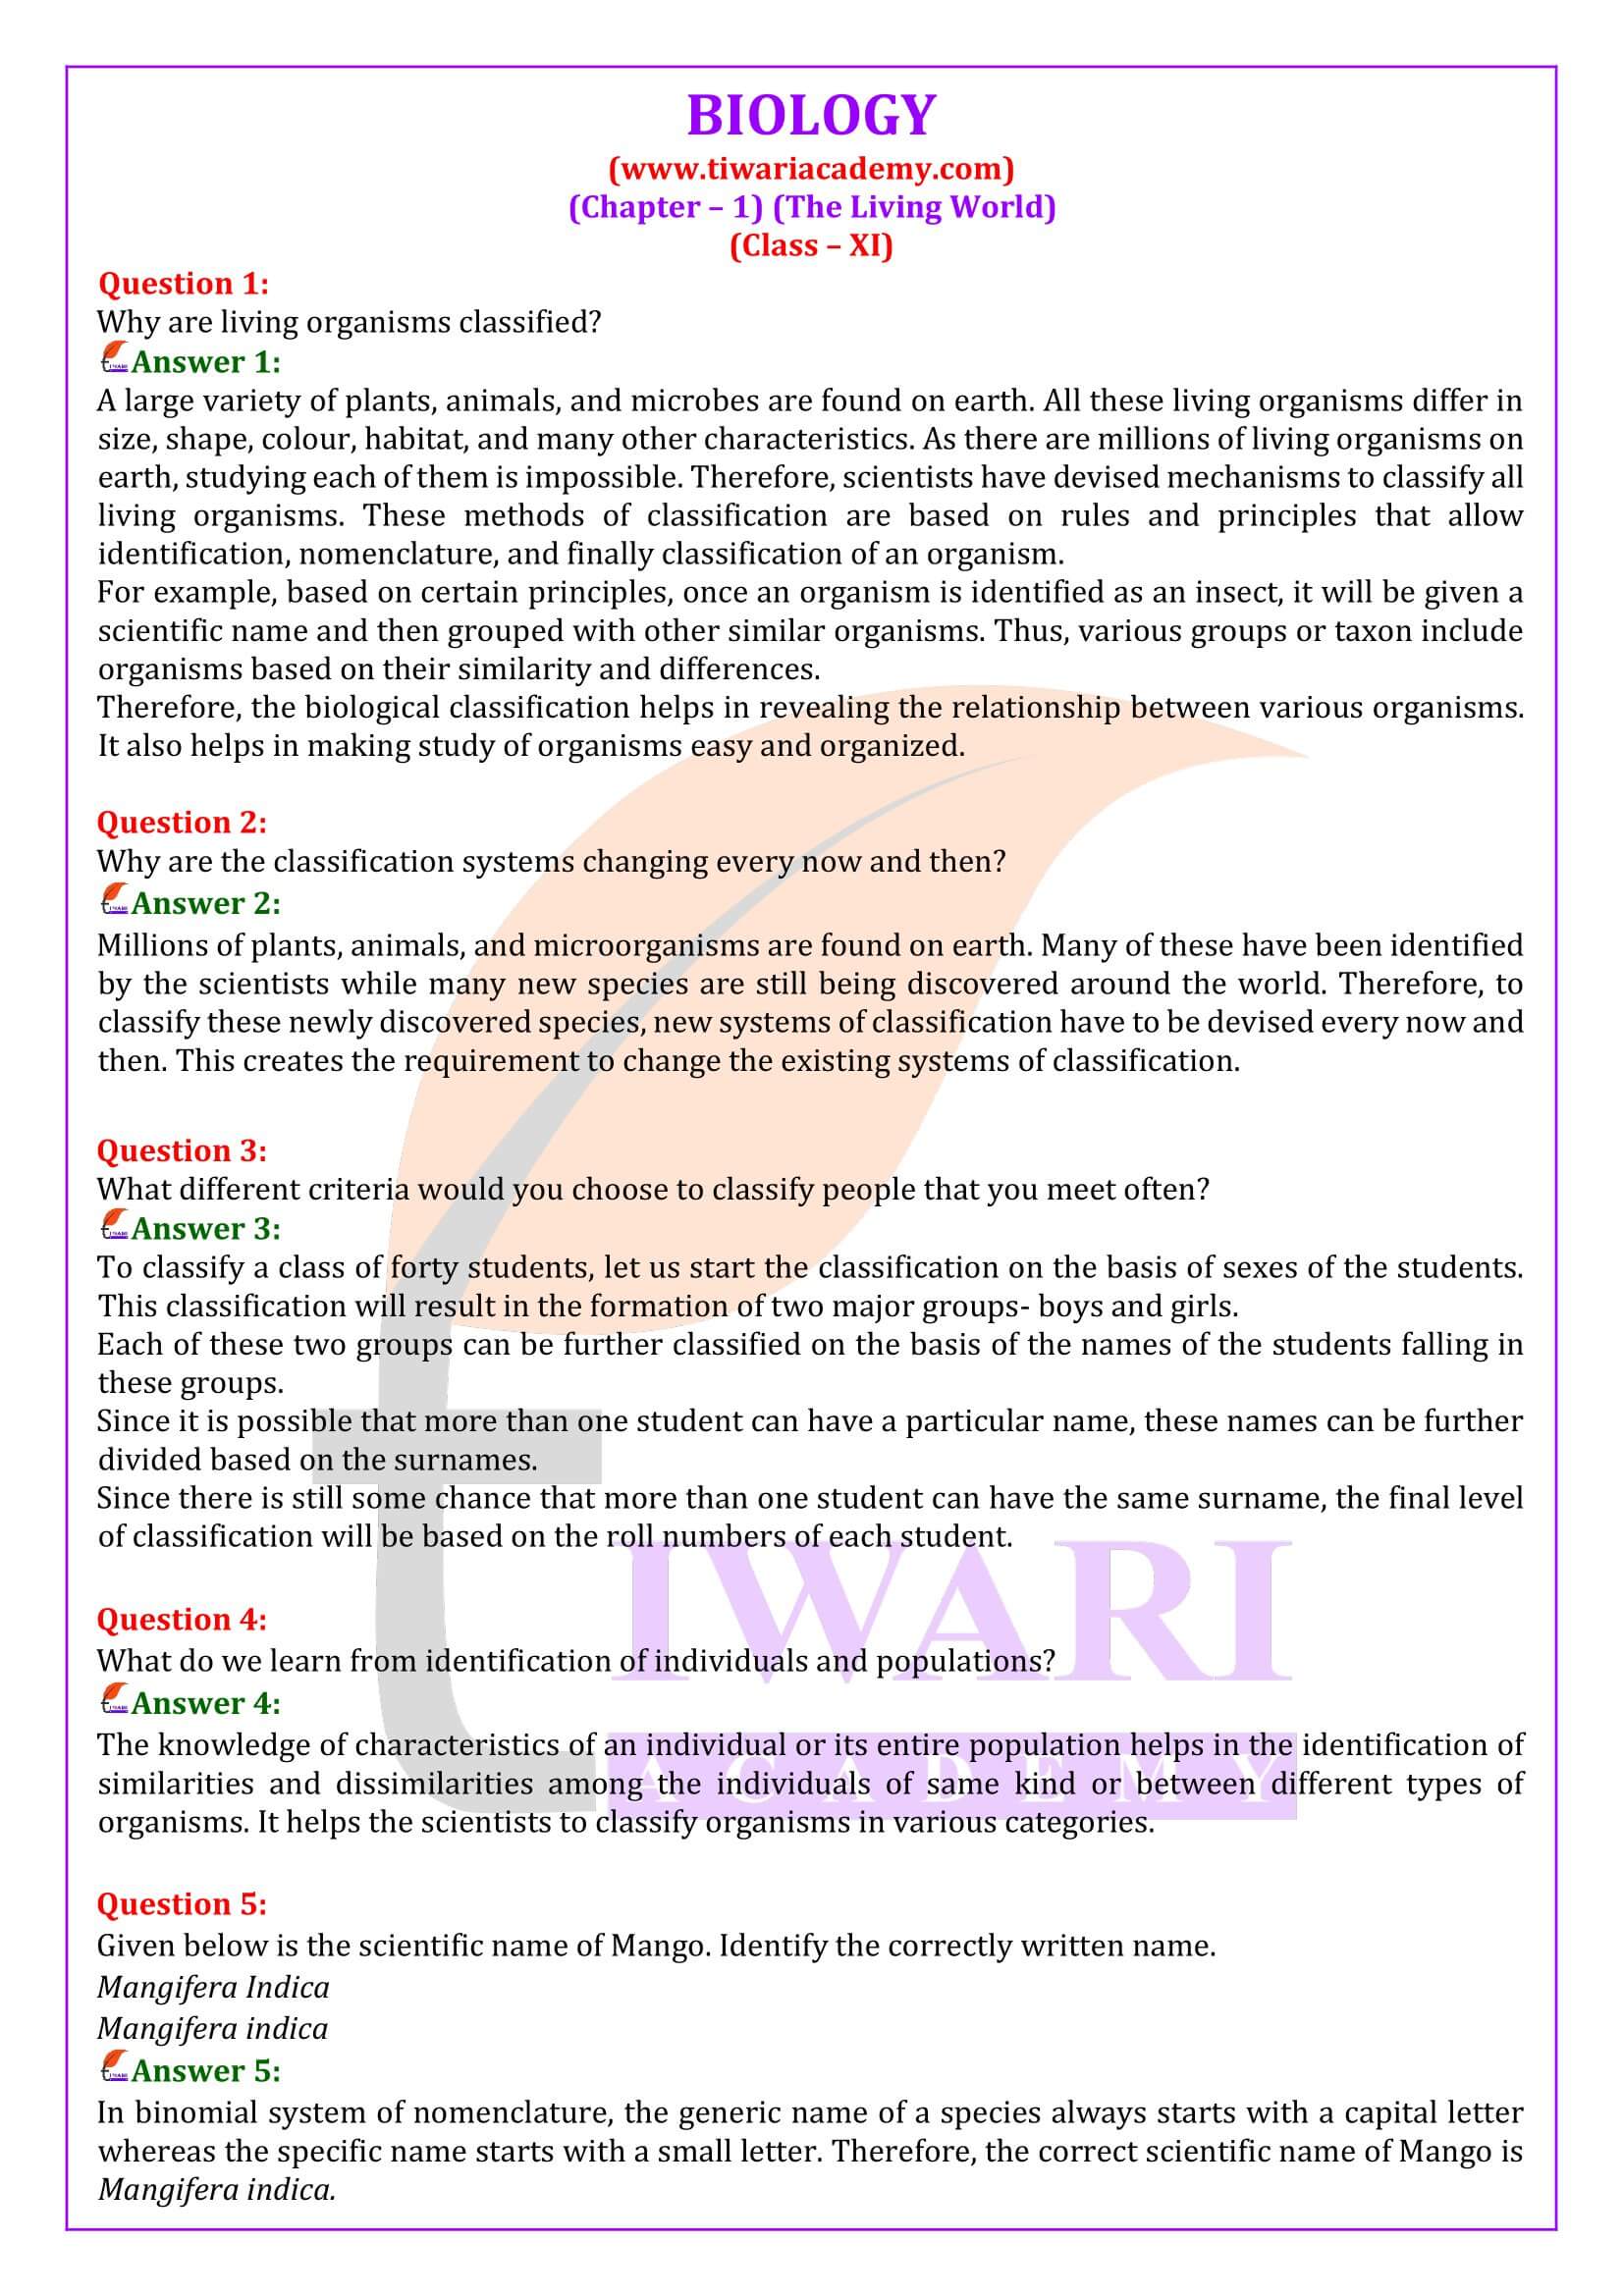 NCERT Solutions for Class 11 Biology Chapter 1